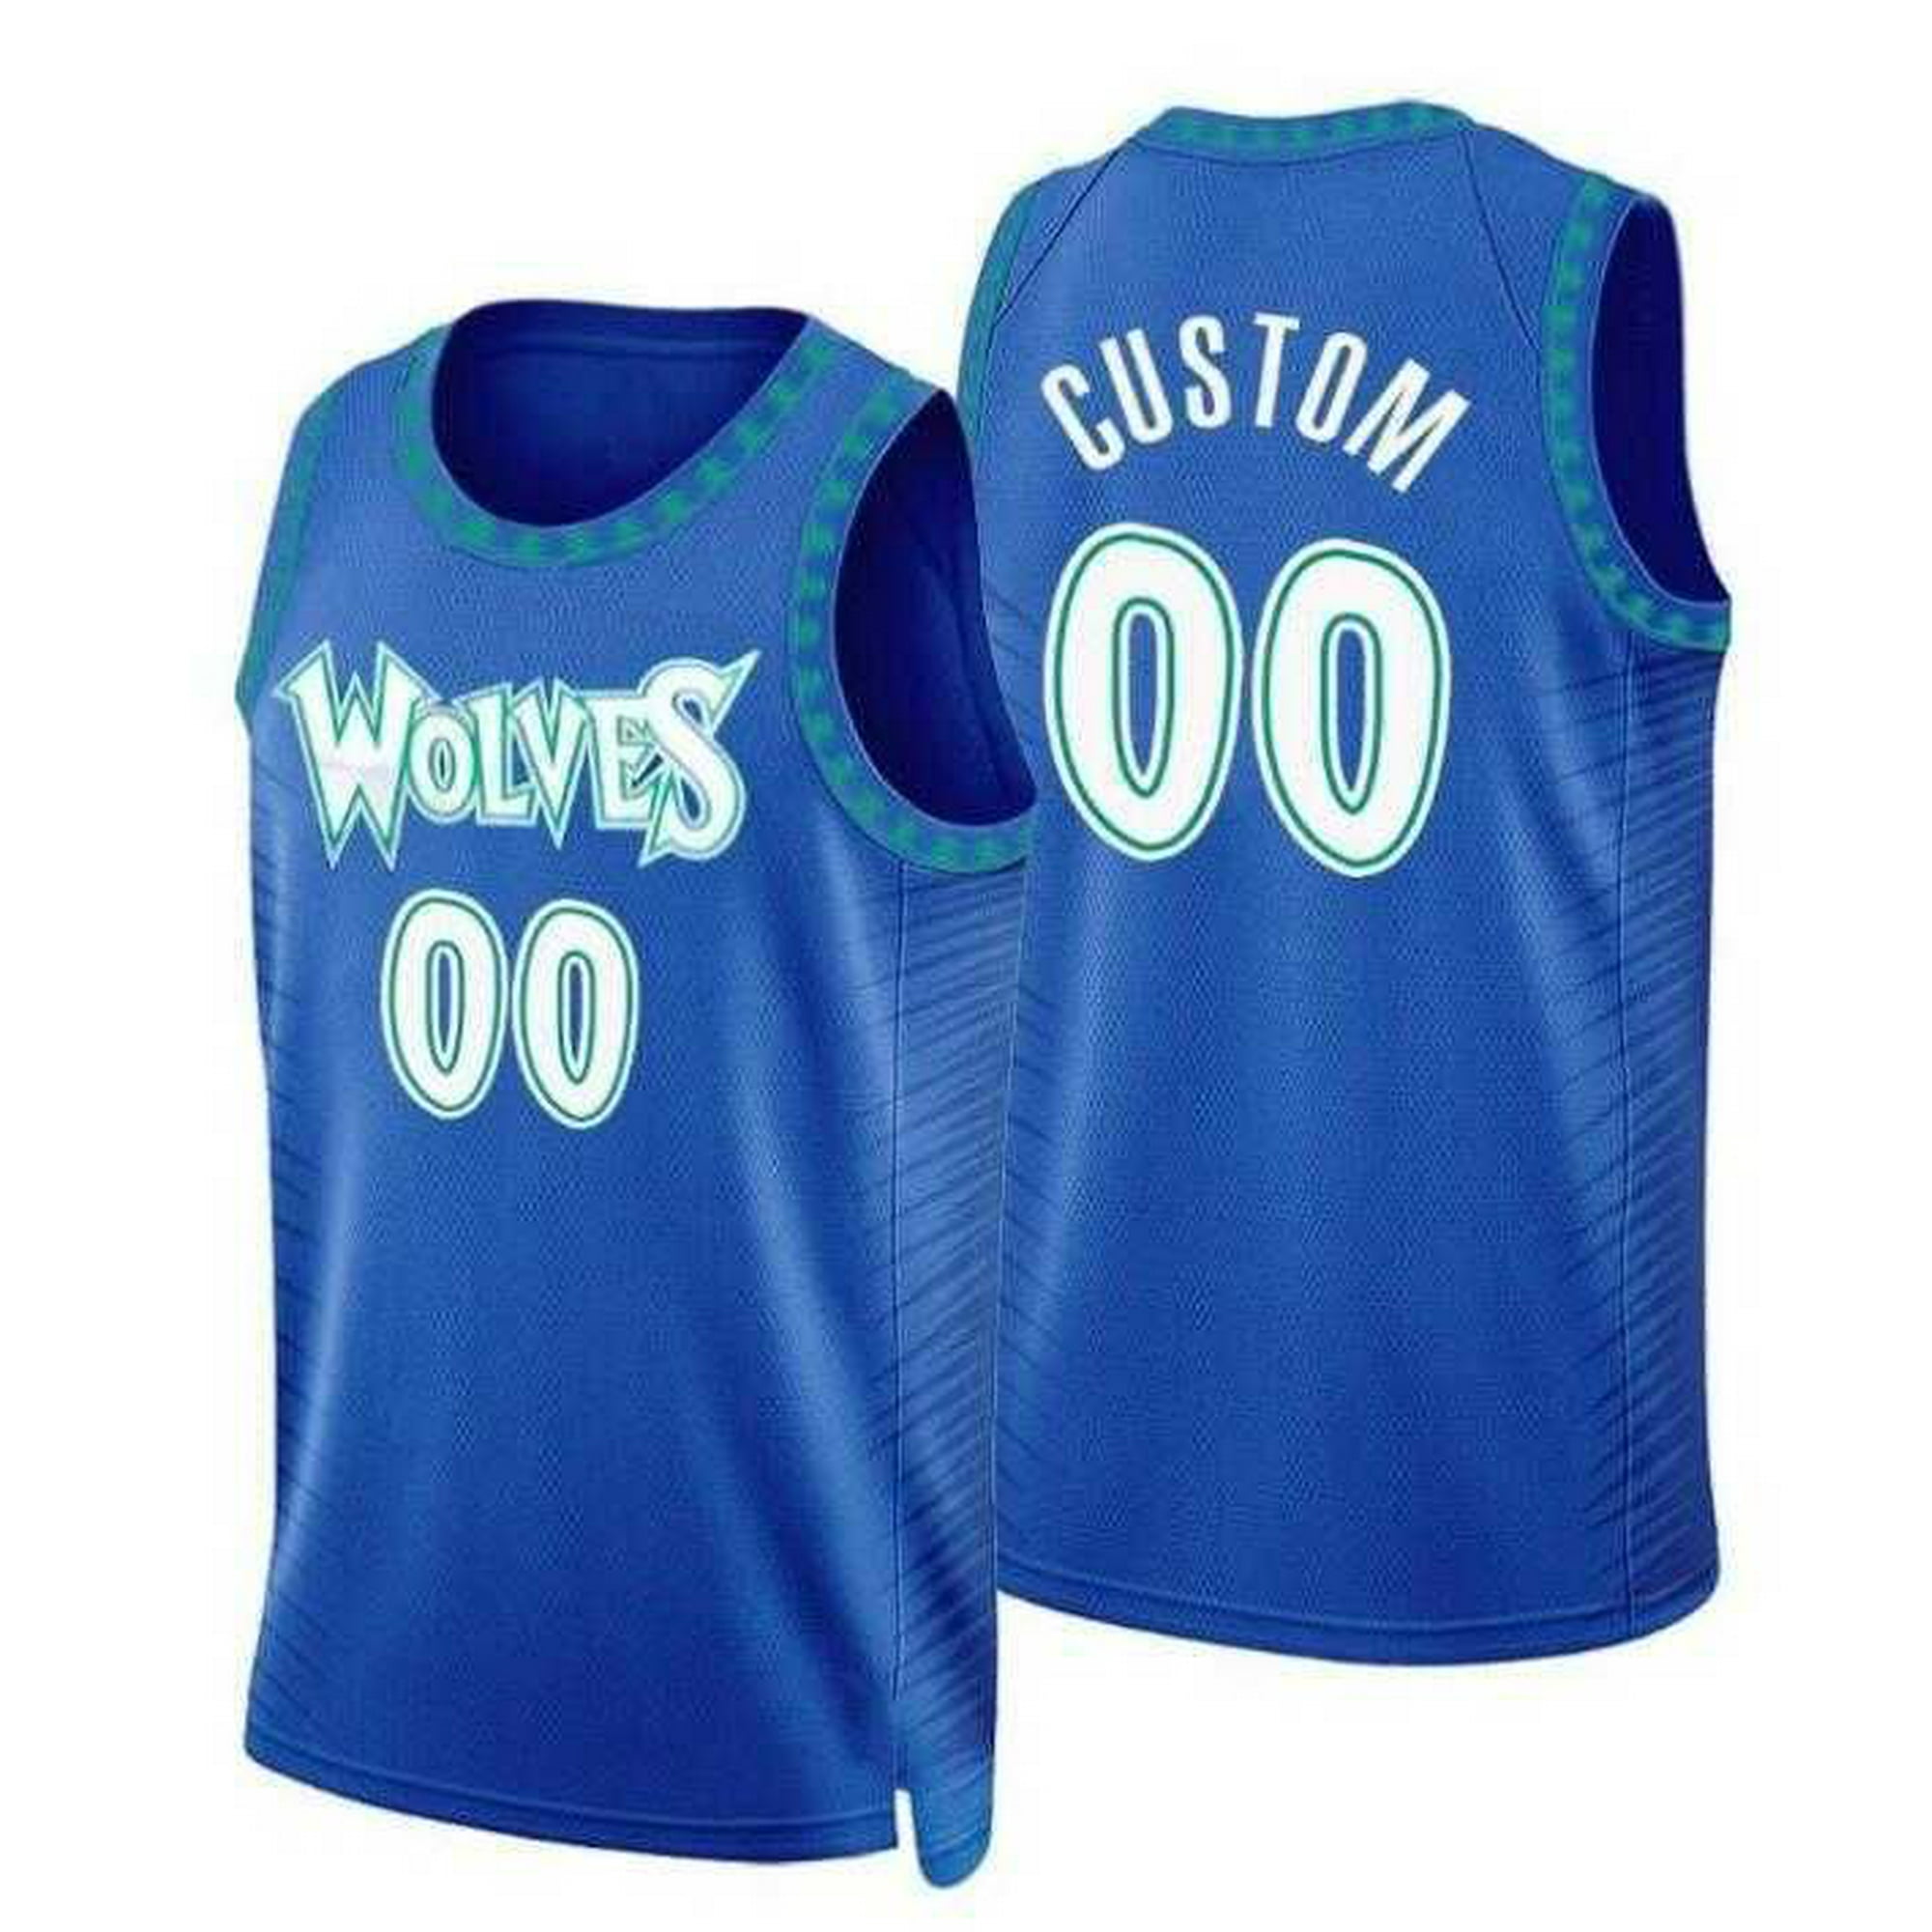 mn wolves jersey